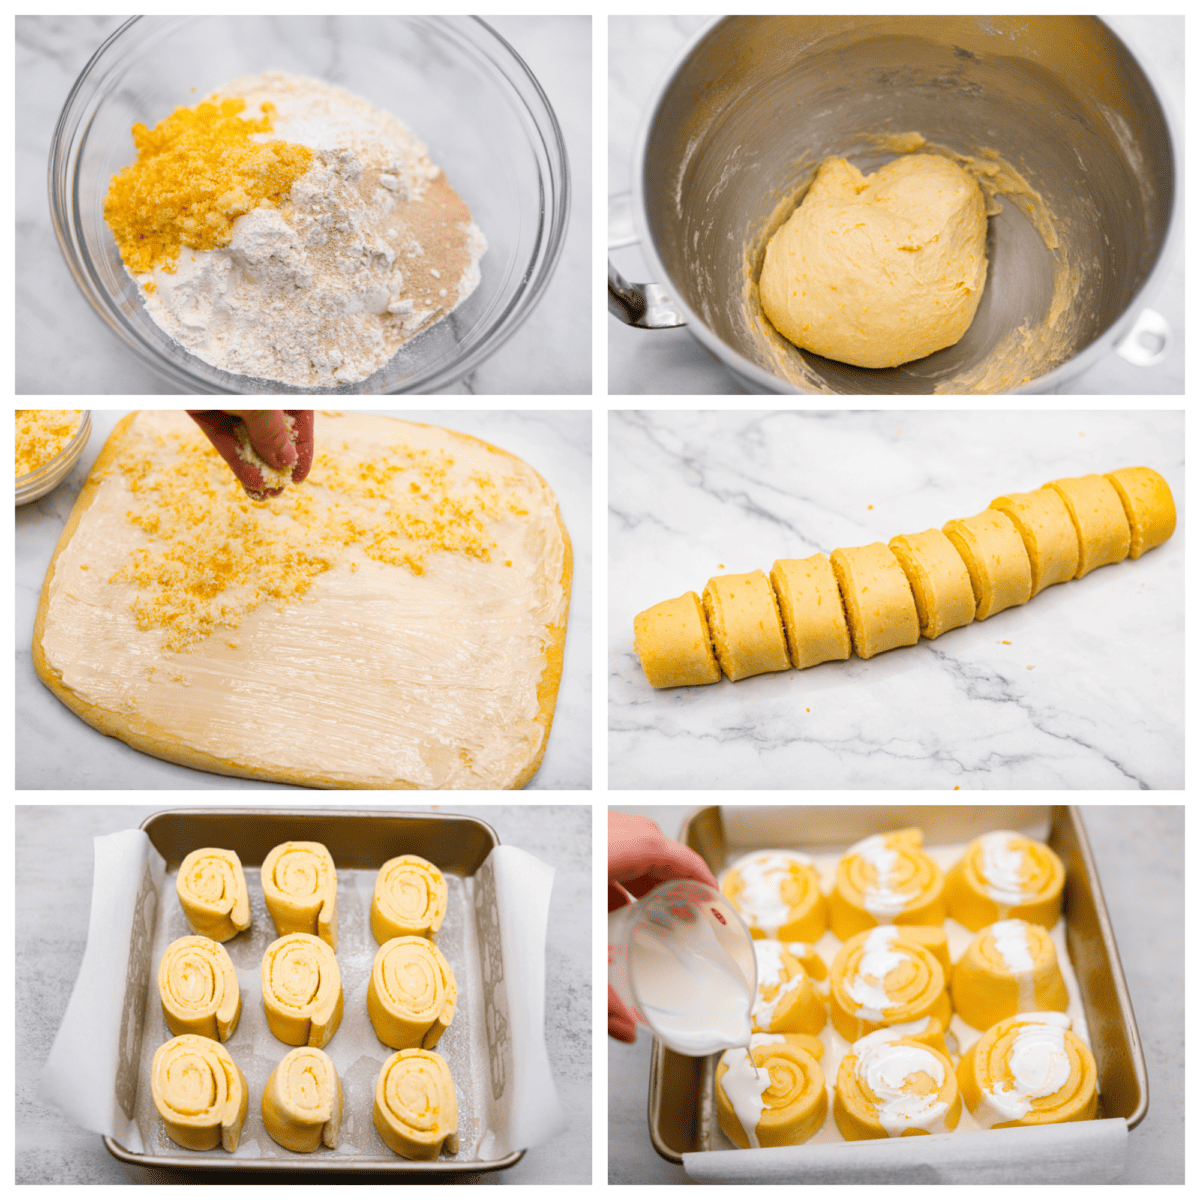 6 picture sin a collage showing how to make orange rolls. 